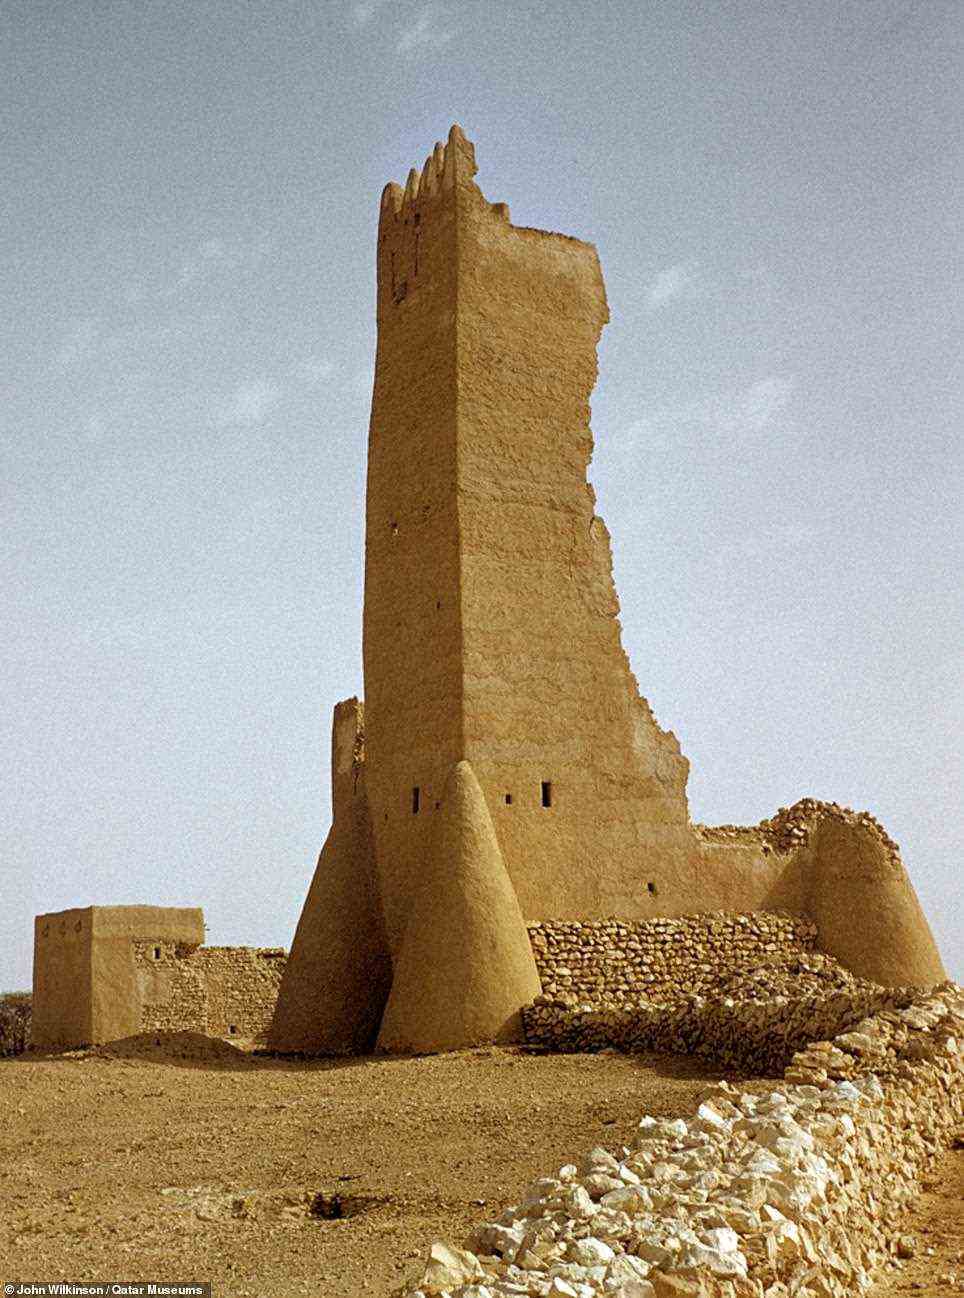 BARZAN TOWERS: Above, the Barzan Towers are seen circa 1959. The watchtowers were built in the late 19th century. At 16 metres (52.4ft) in height, their name was inspired by their stature - in Arabic, 'barzan' means 'high place'